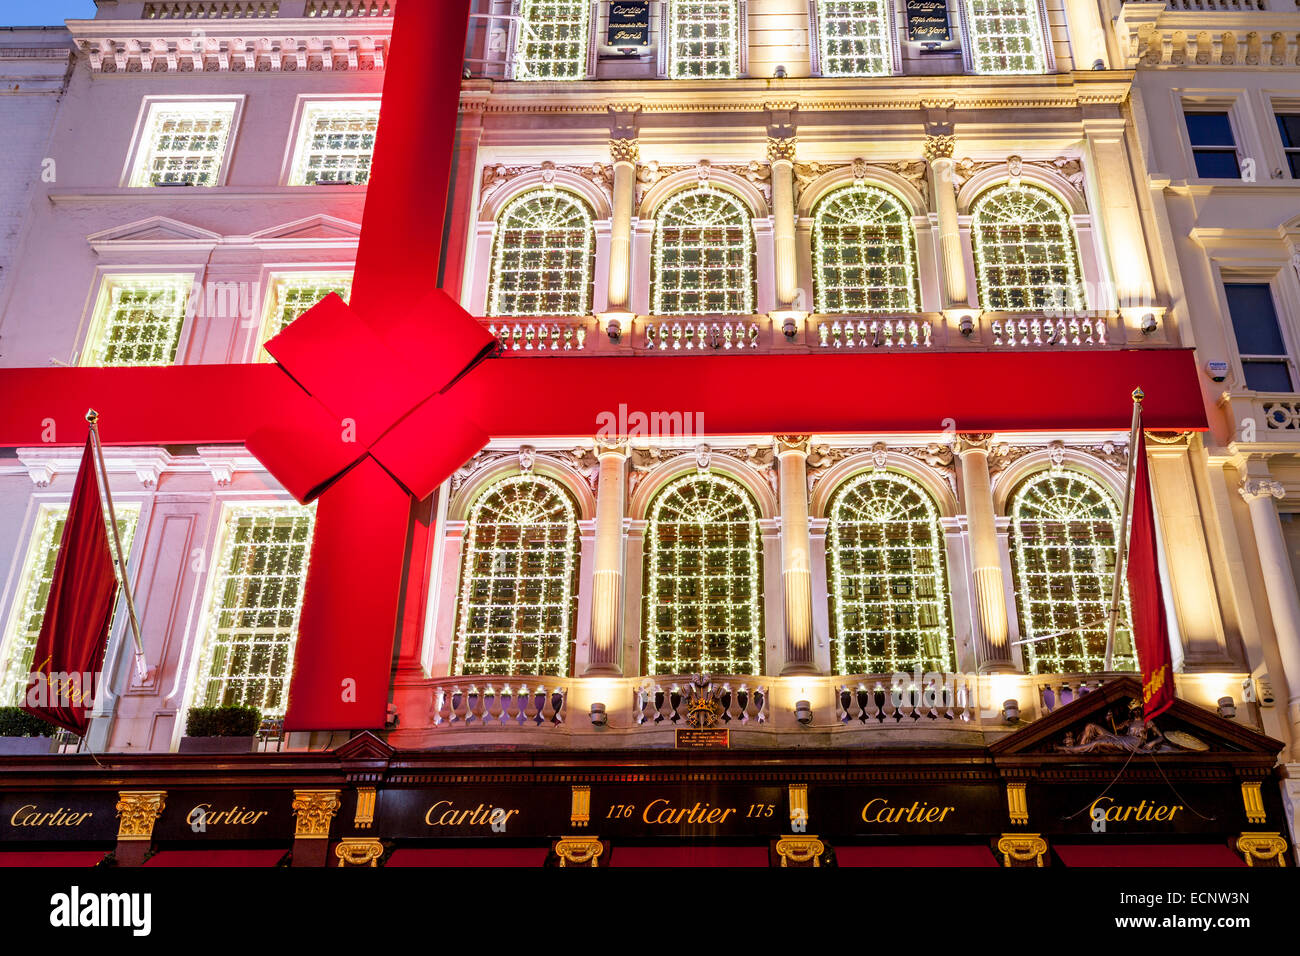 The Cartier Store In New Bond Street 